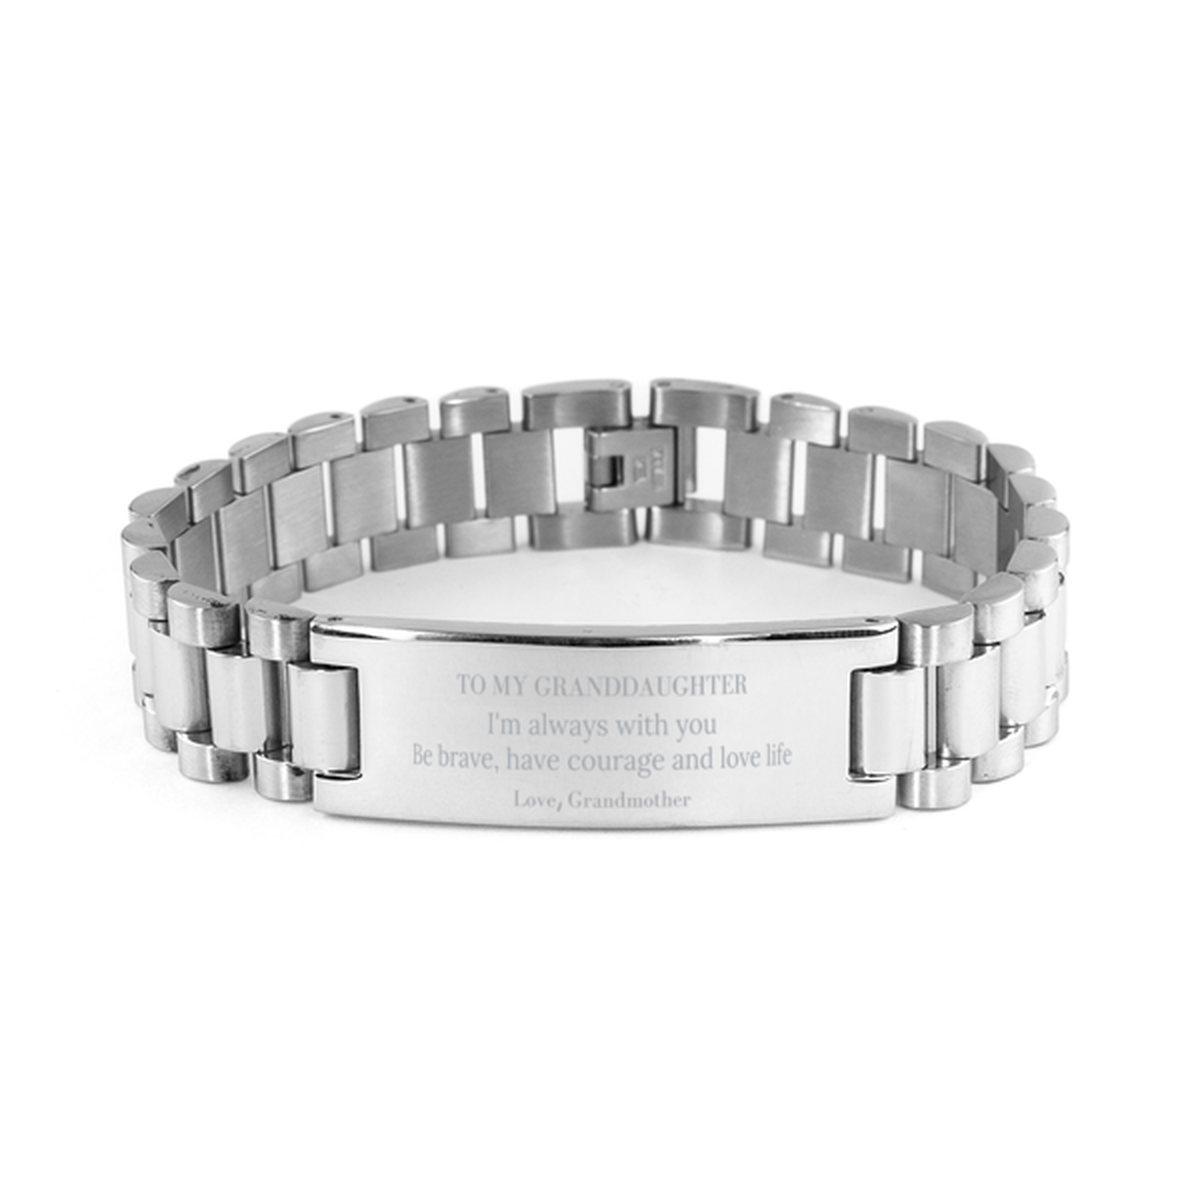 To My Granddaughter Gifts from Grandmother, Unique Ladder Stainless Steel Bracelet Inspirational Christmas Birthday Graduation Gifts for Granddaughter I'm always with you. Be brave, have courage and love life. Love, Grandmother